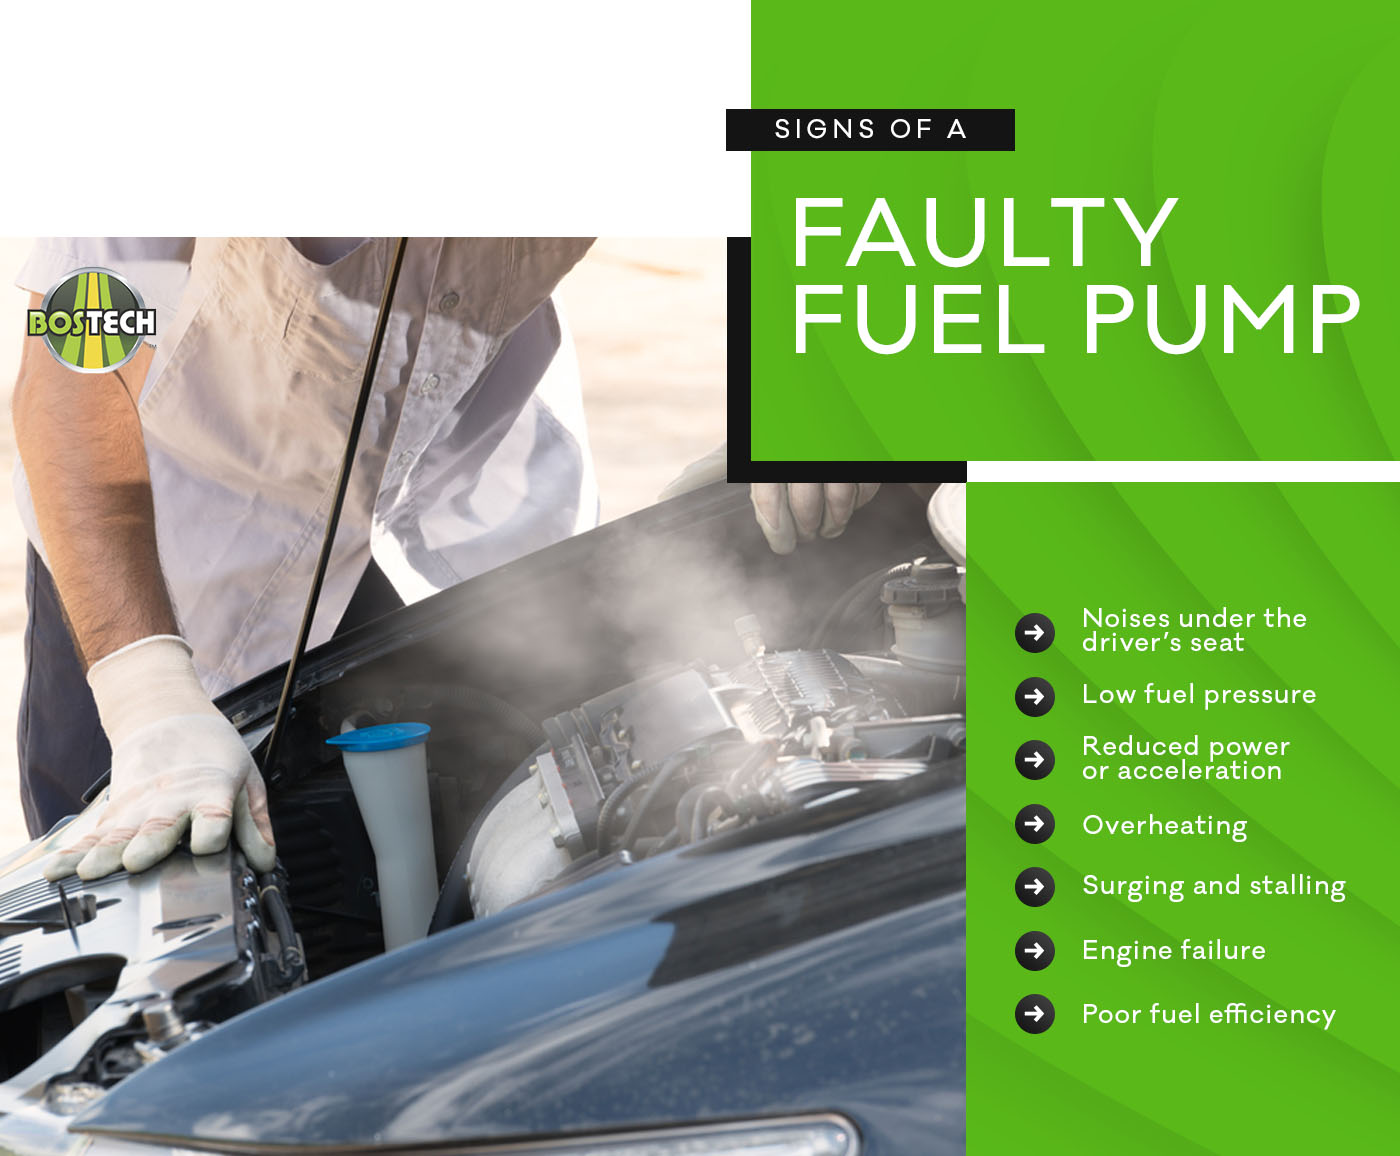 Signs of a Faulty Fuel Pump